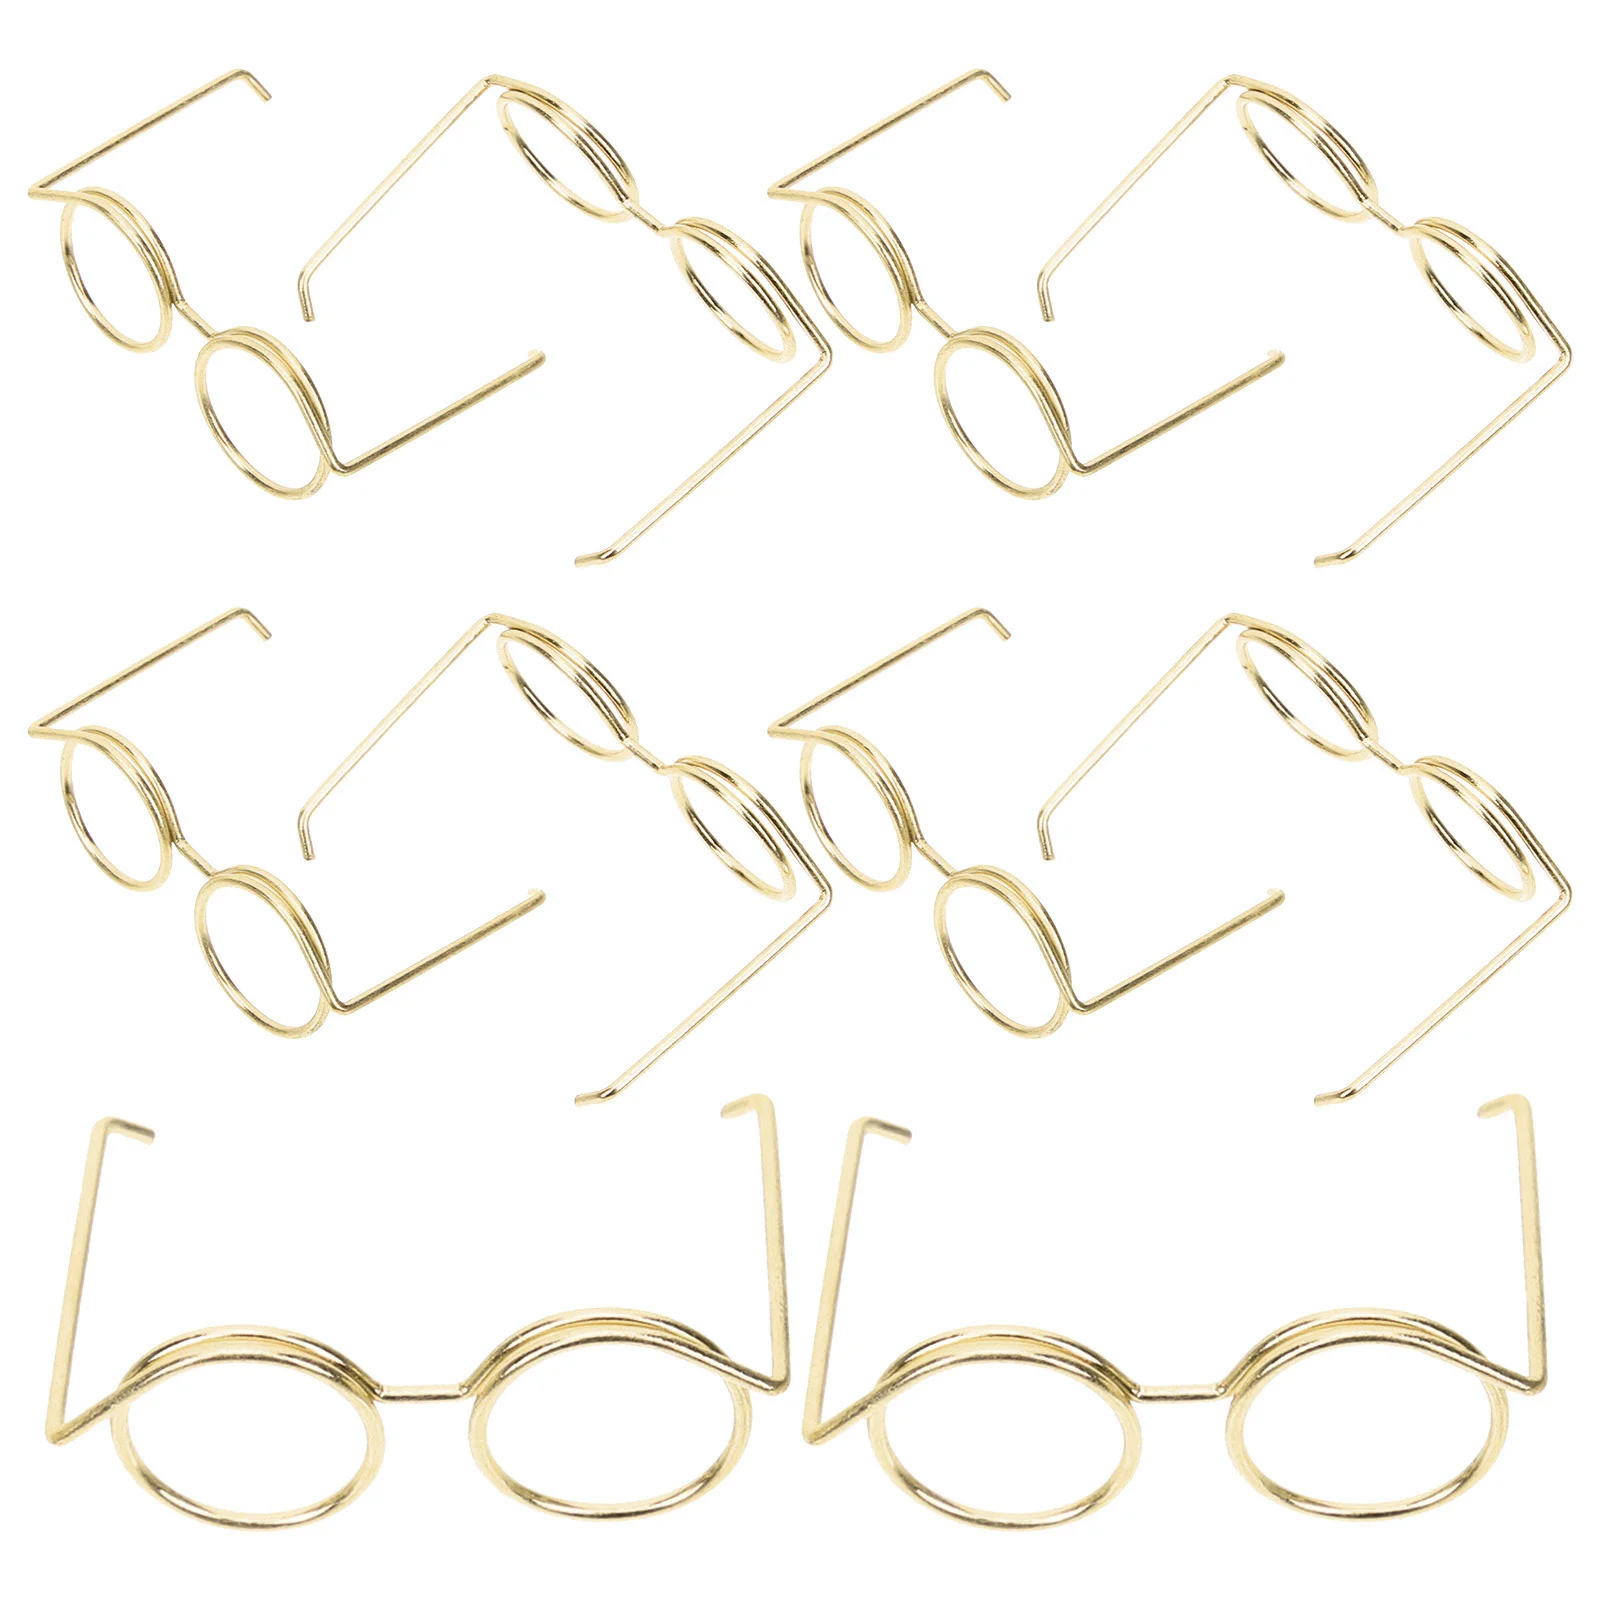 Retro Doll Glasses Metal Round Frame Lensless Eyewear Doll Sunglasses Doll Dress Up Accessories Children Gifts assembleable bamboo sunglasses stand glasses display jewelry holder bracelet watches show product 4